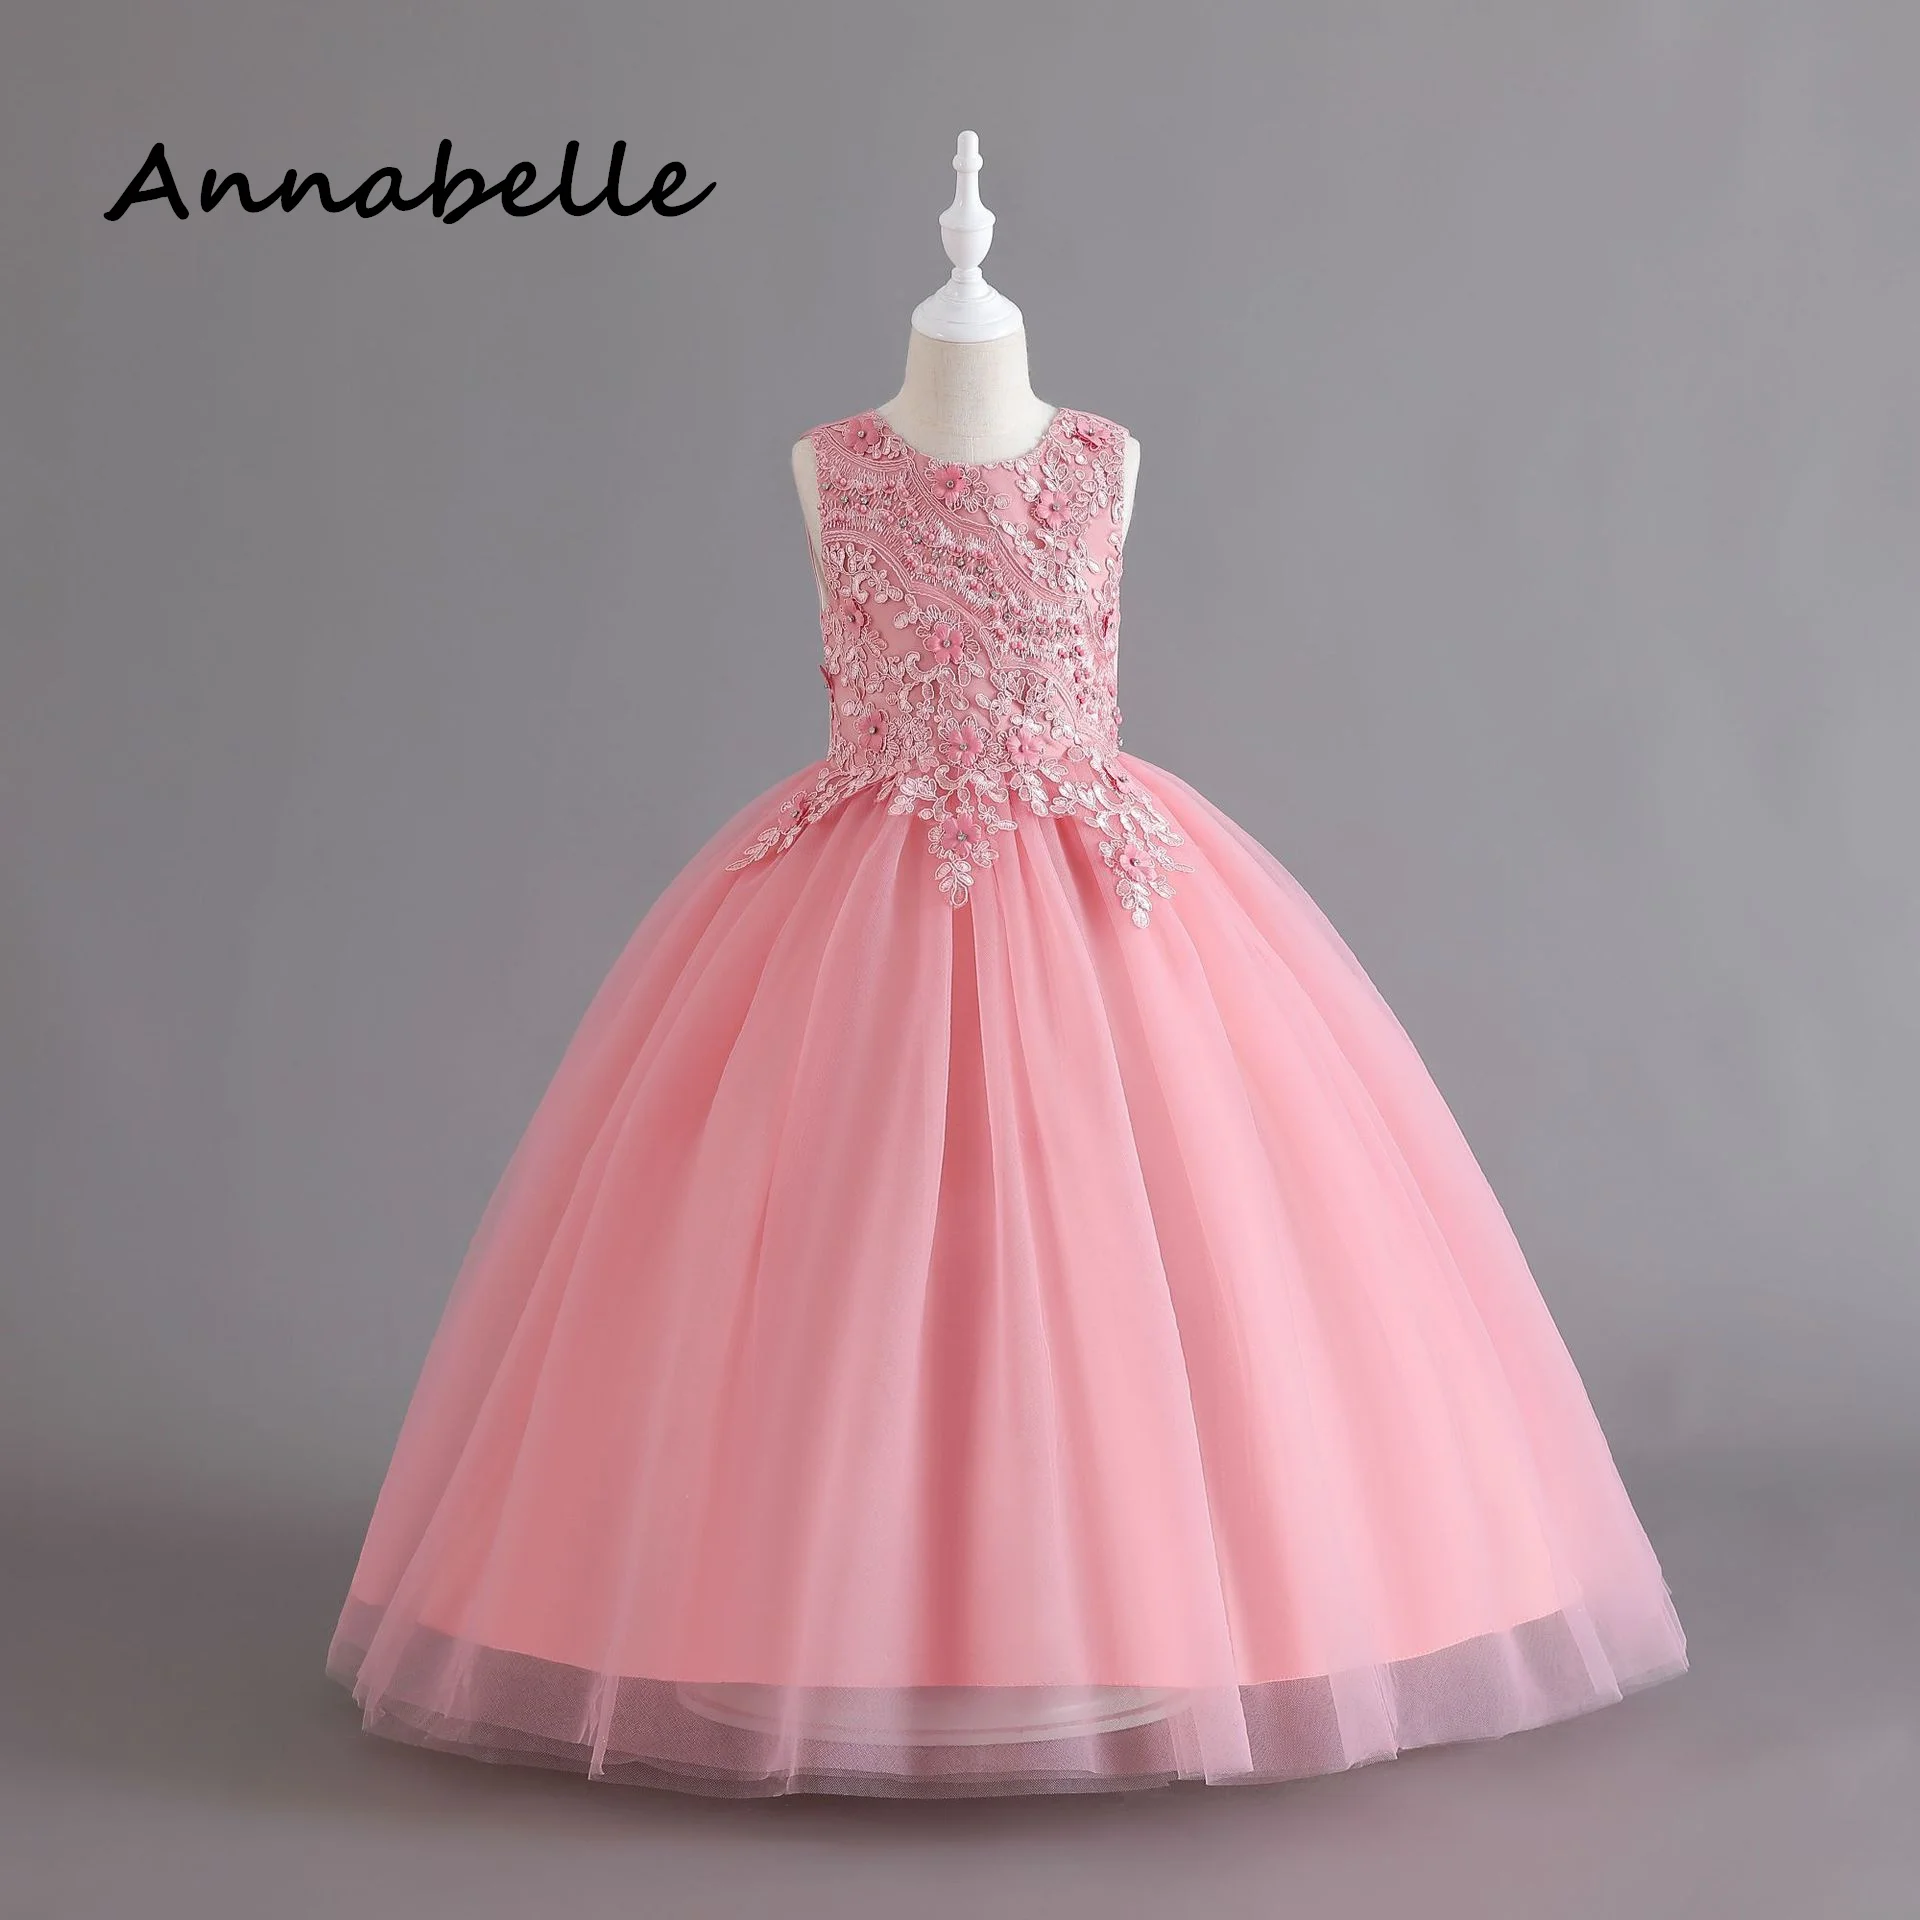 

Annabelle Flower Girl Princess Dress Baby Girl Ceremony Birthday Puffy Appliques For Wedding Party Bridesmaid Bow Dresses